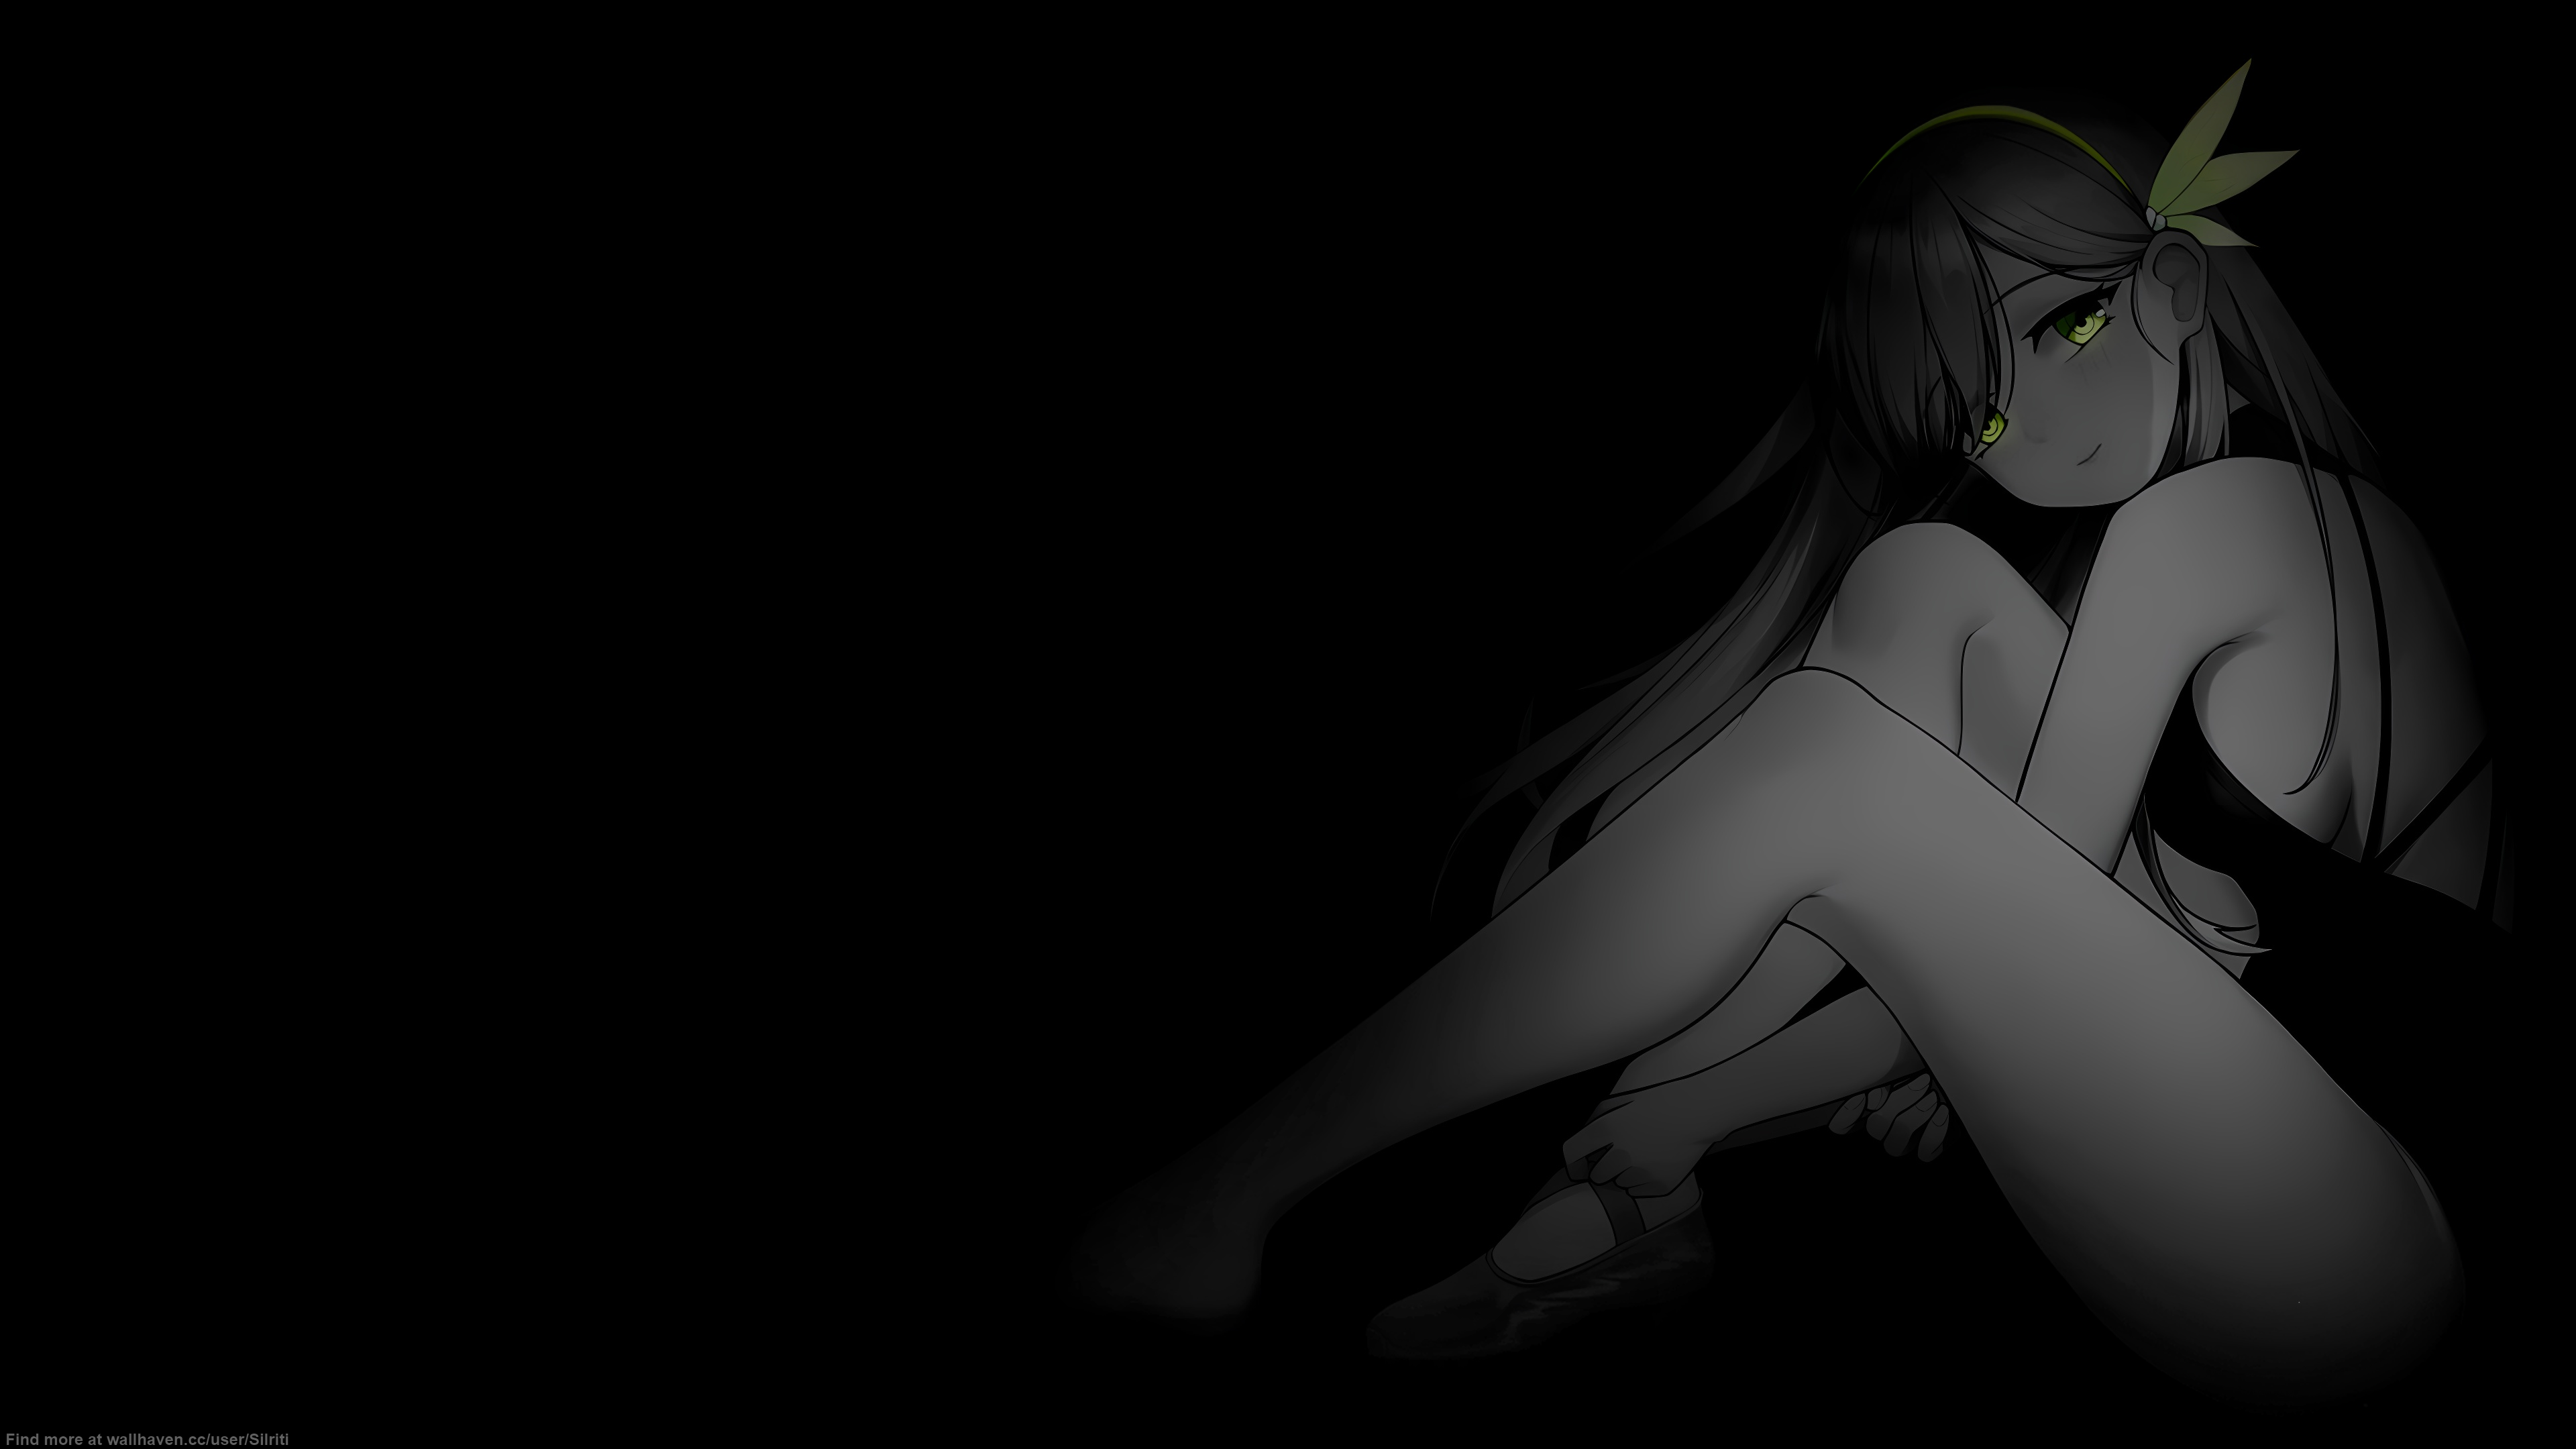 Selective Coloring Black Background Dark Background Anime Girls Simple  Background Minimalism Dress L Wallpaper - Resolution:3840x2160 - ID:1370522  